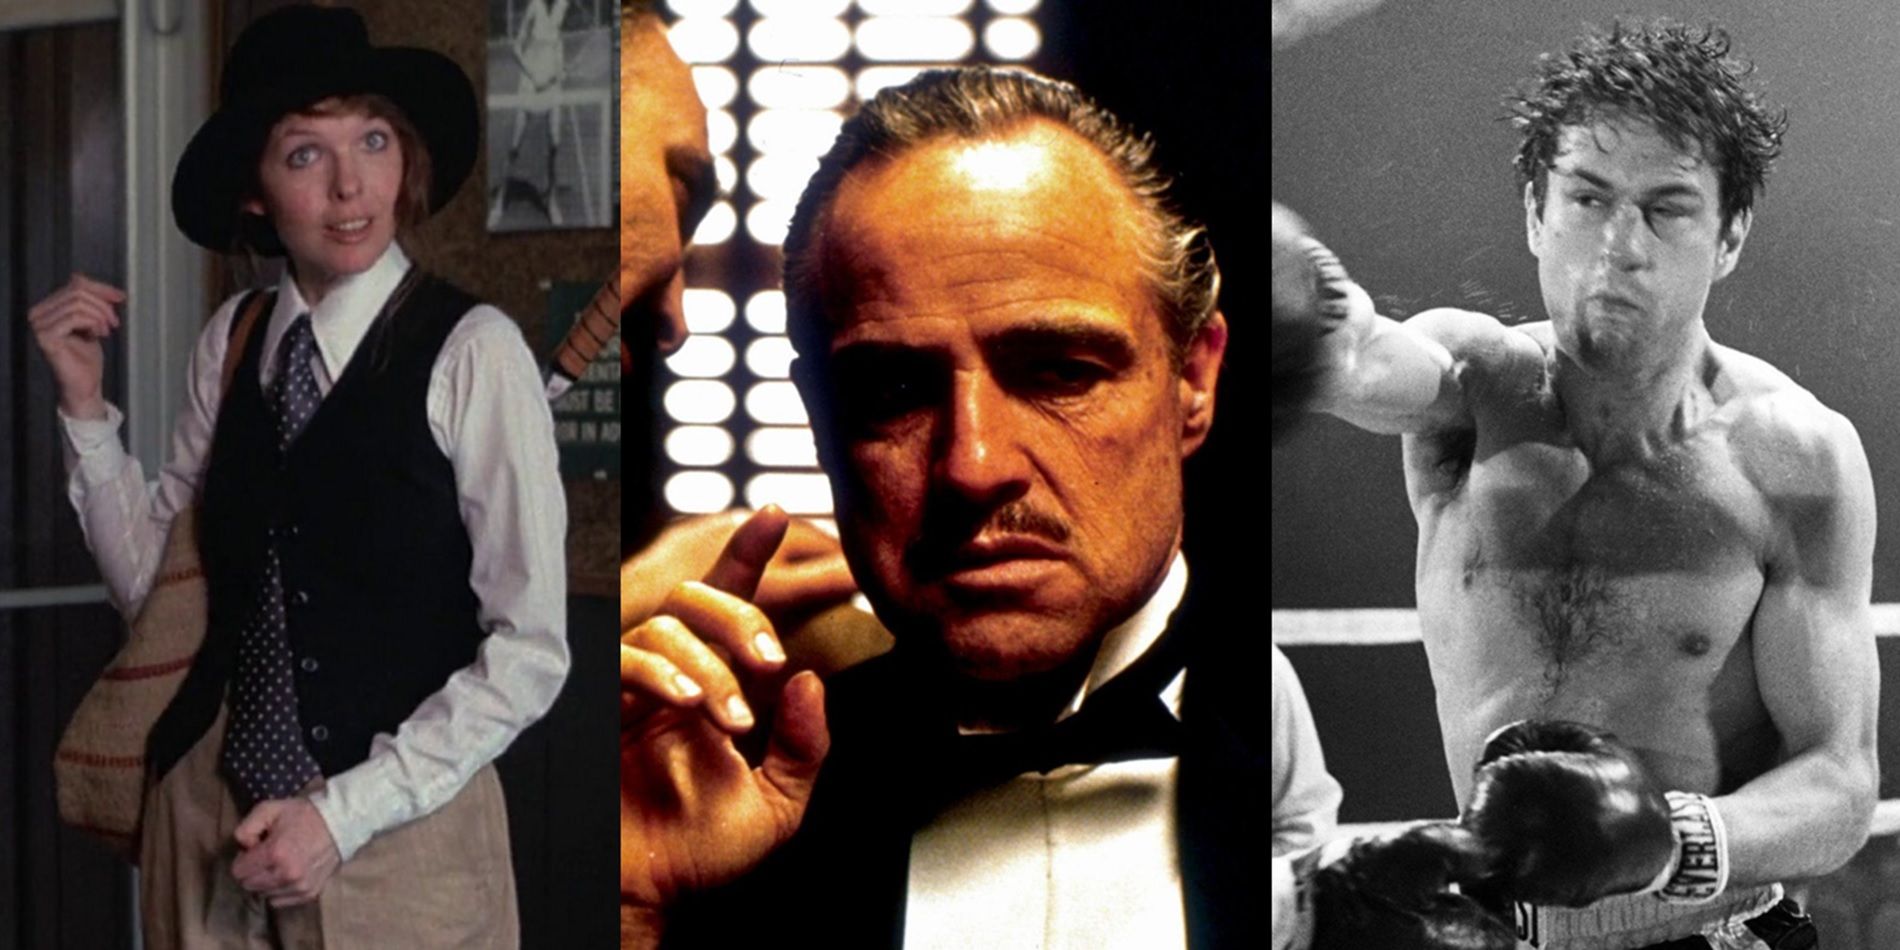 Underrated movies starring Godfather actors